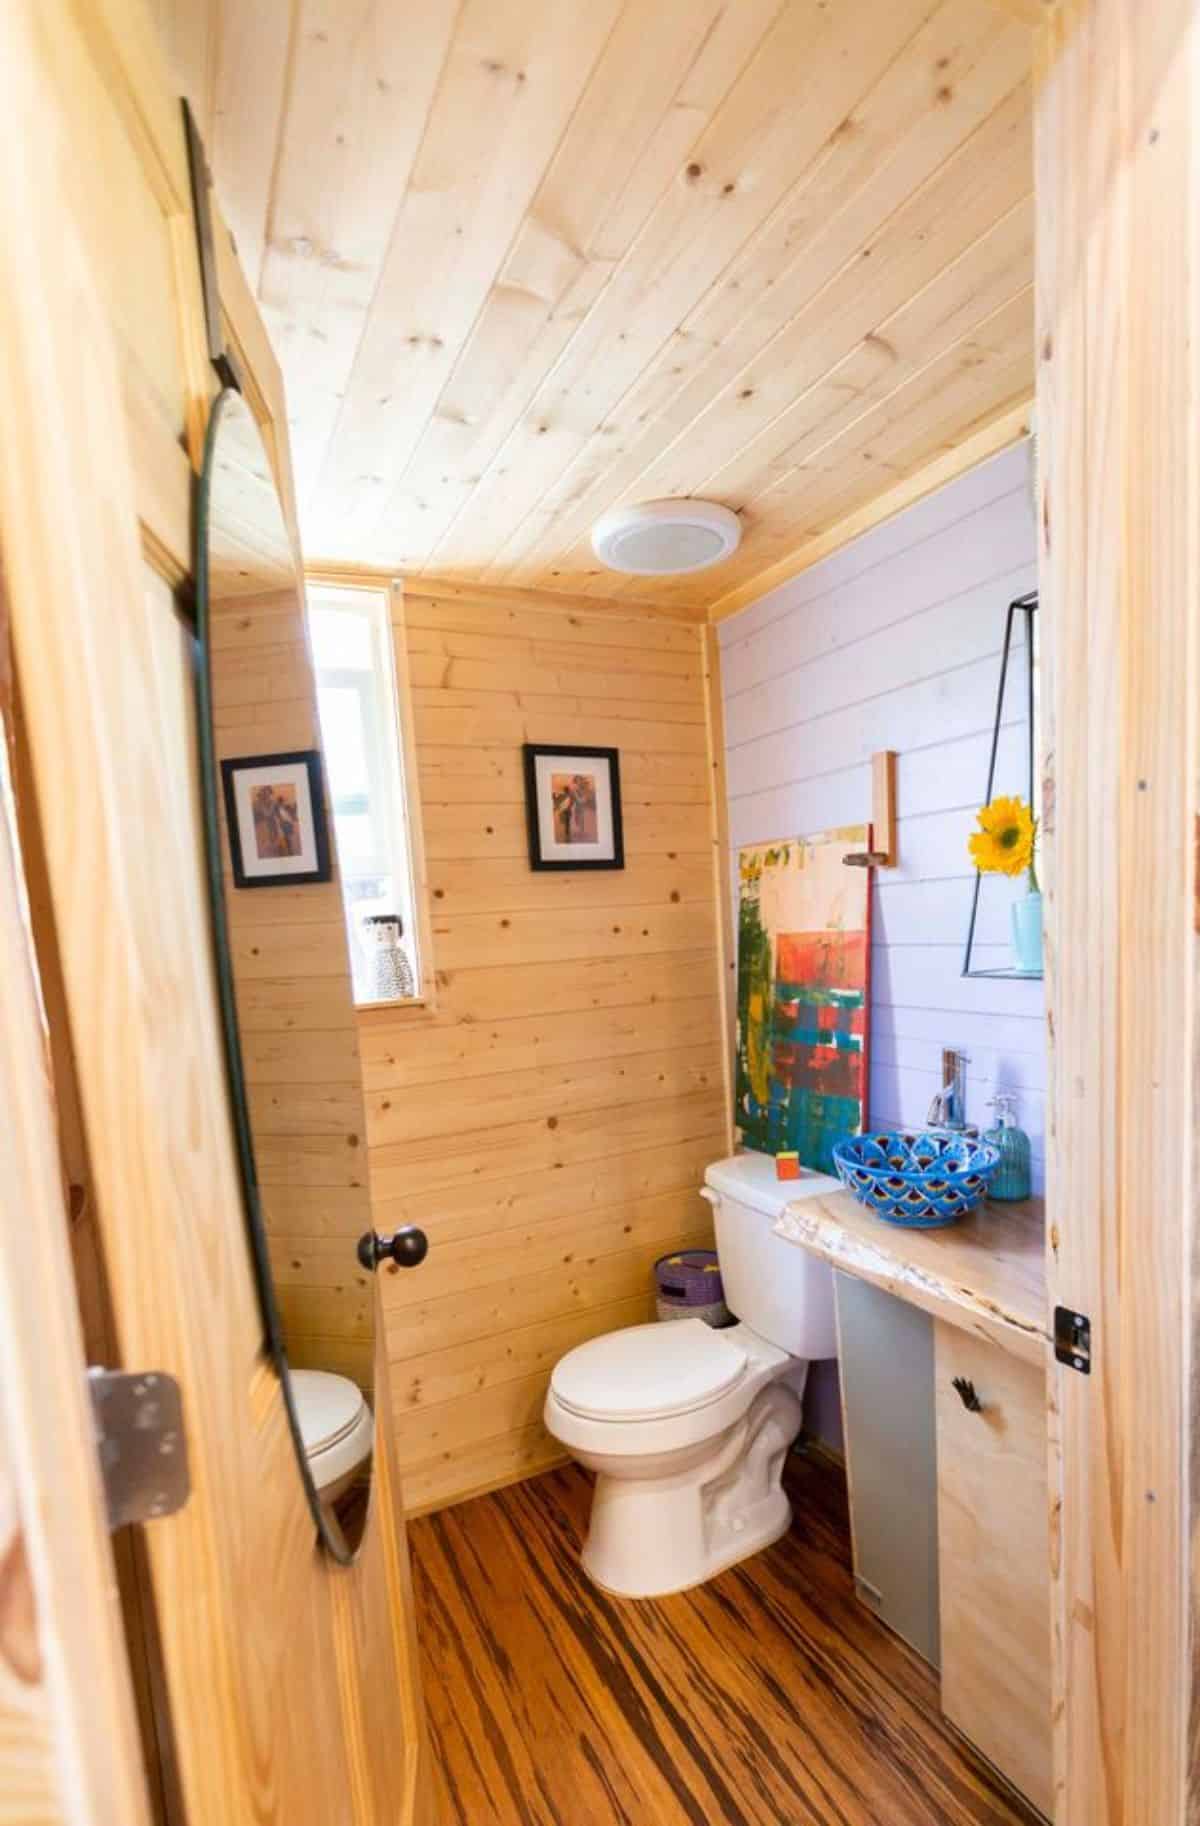 bathroom of mini cabin home has all the standard fittings